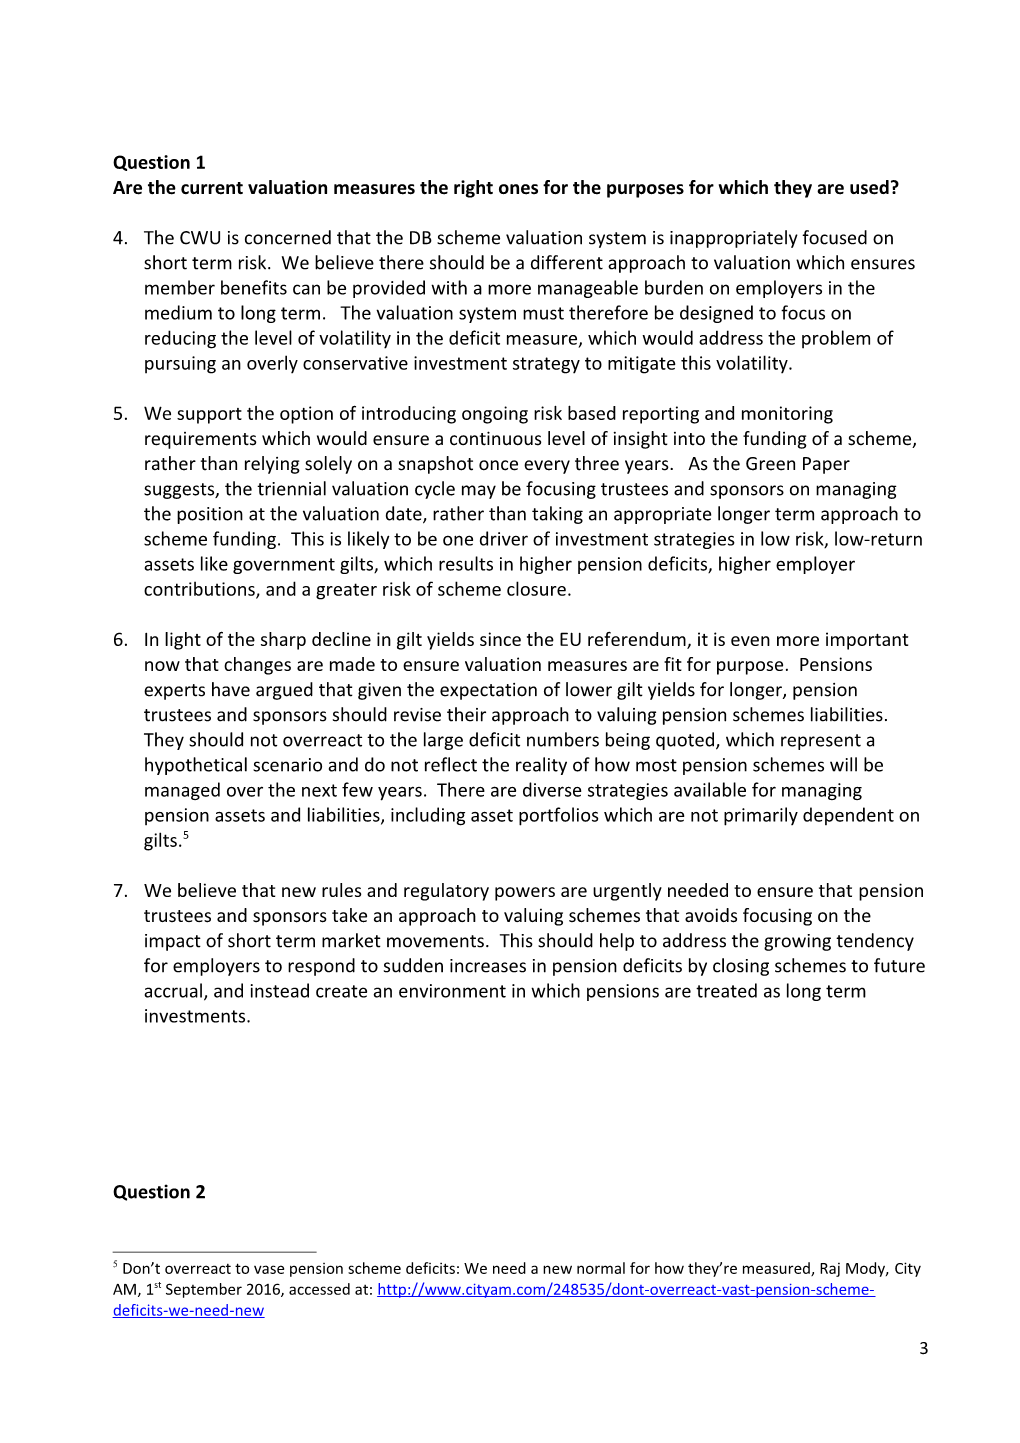 CWU Submission to the Department for Work and Pensions on Security and Sustainability